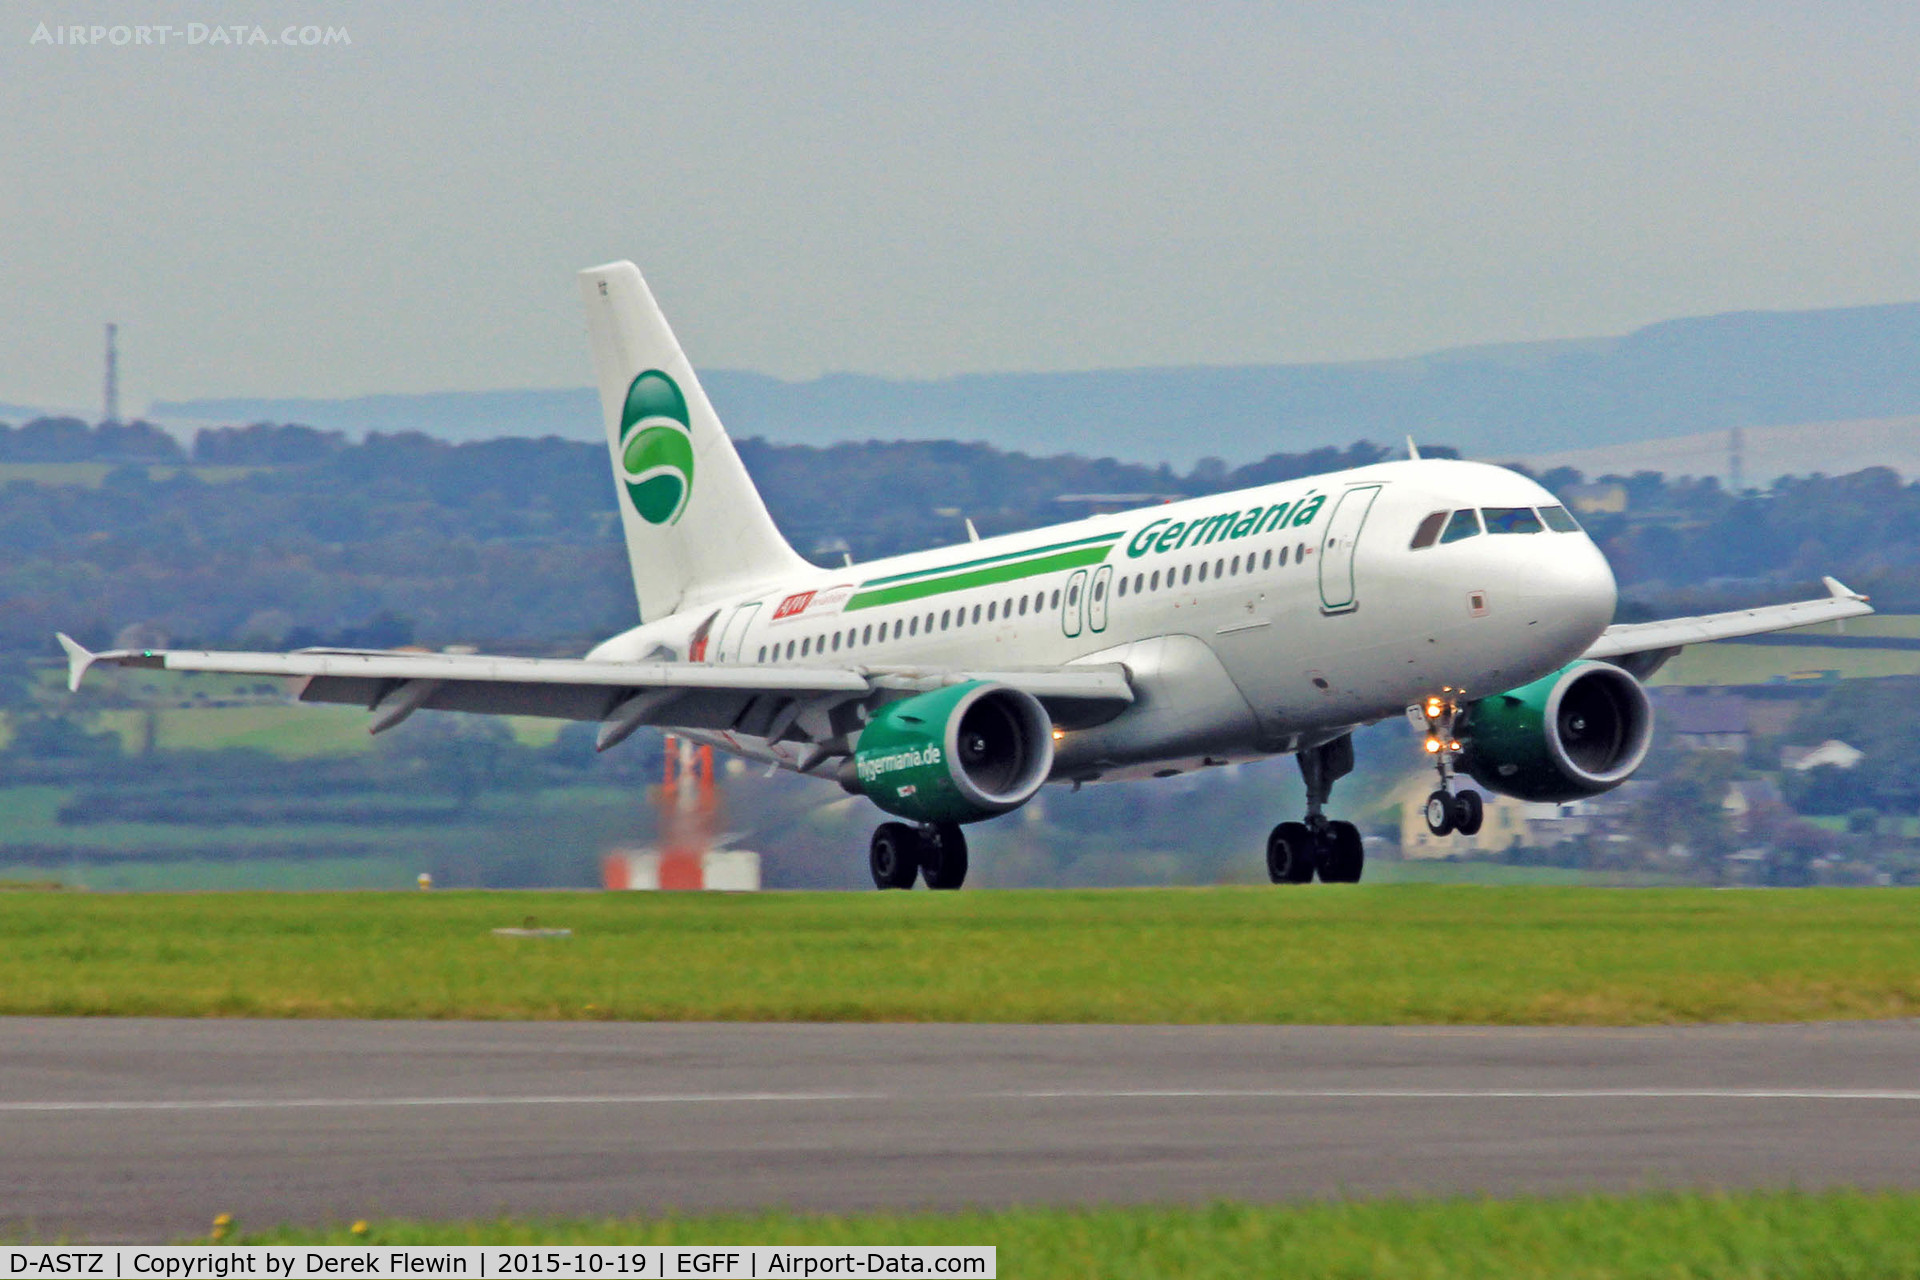 D-ASTZ, 2007 Airbus A319-112 C/N 3019, A319-112, call sign Germania 6364, previously D-AVXM, OE-LEK, seen landing on runway 12 out of Toulouse Blagnac.